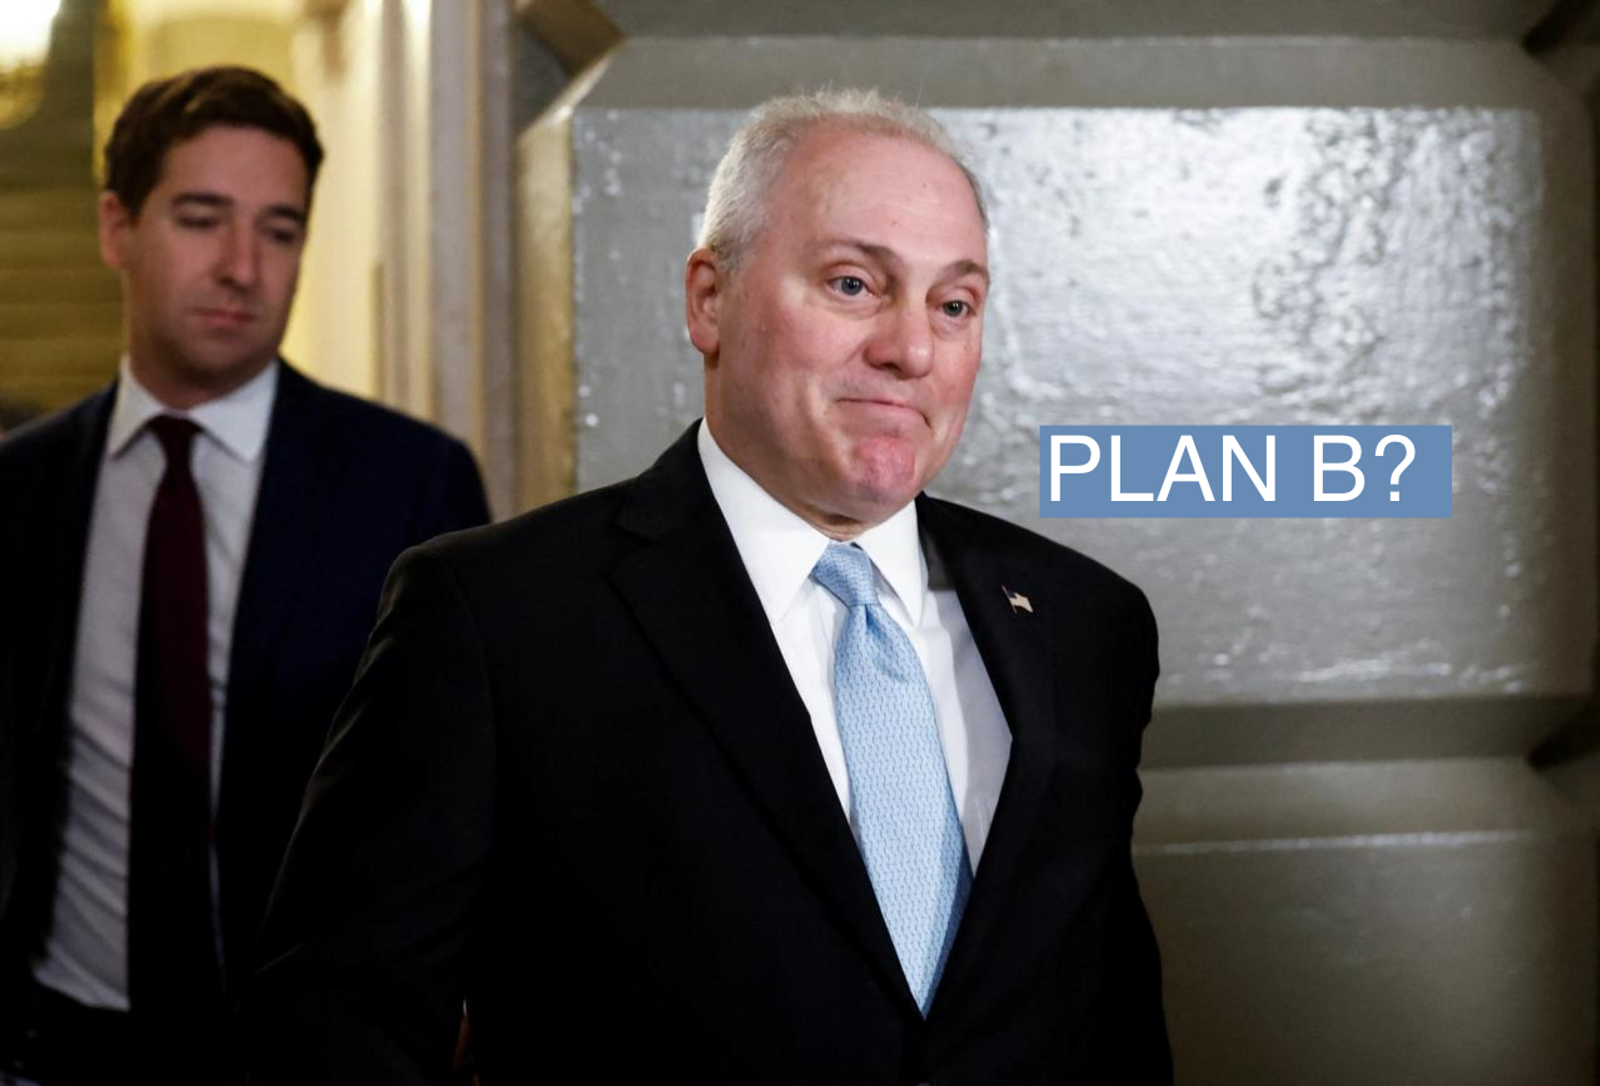 U.S. House Republican Whip Rep. Steve Scalise (R-LA) makes his way through the U.S. Capitol on the first day of the new Congress in Washington, U.S., January 3, 2023.